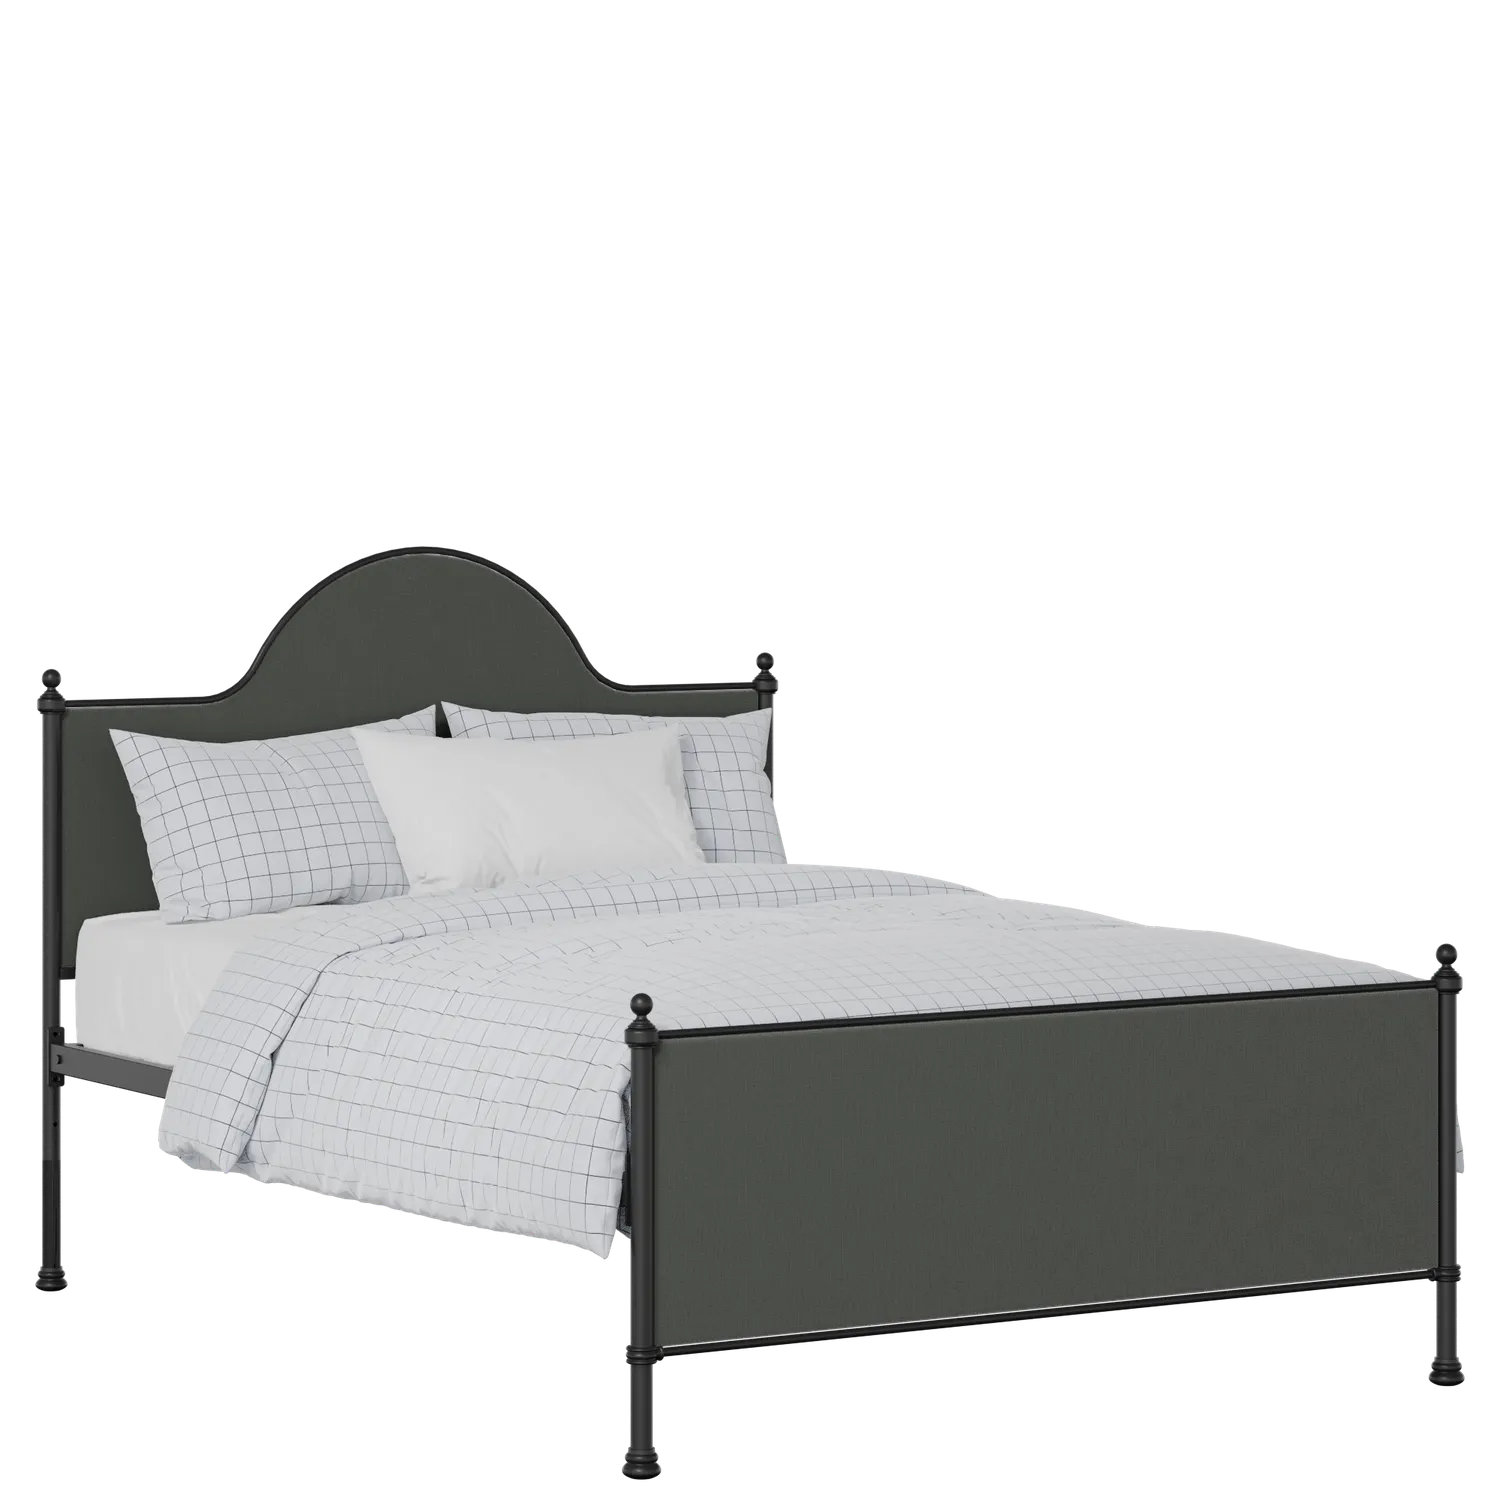 Albert iron/metal upholstered bed in black with iron fabric